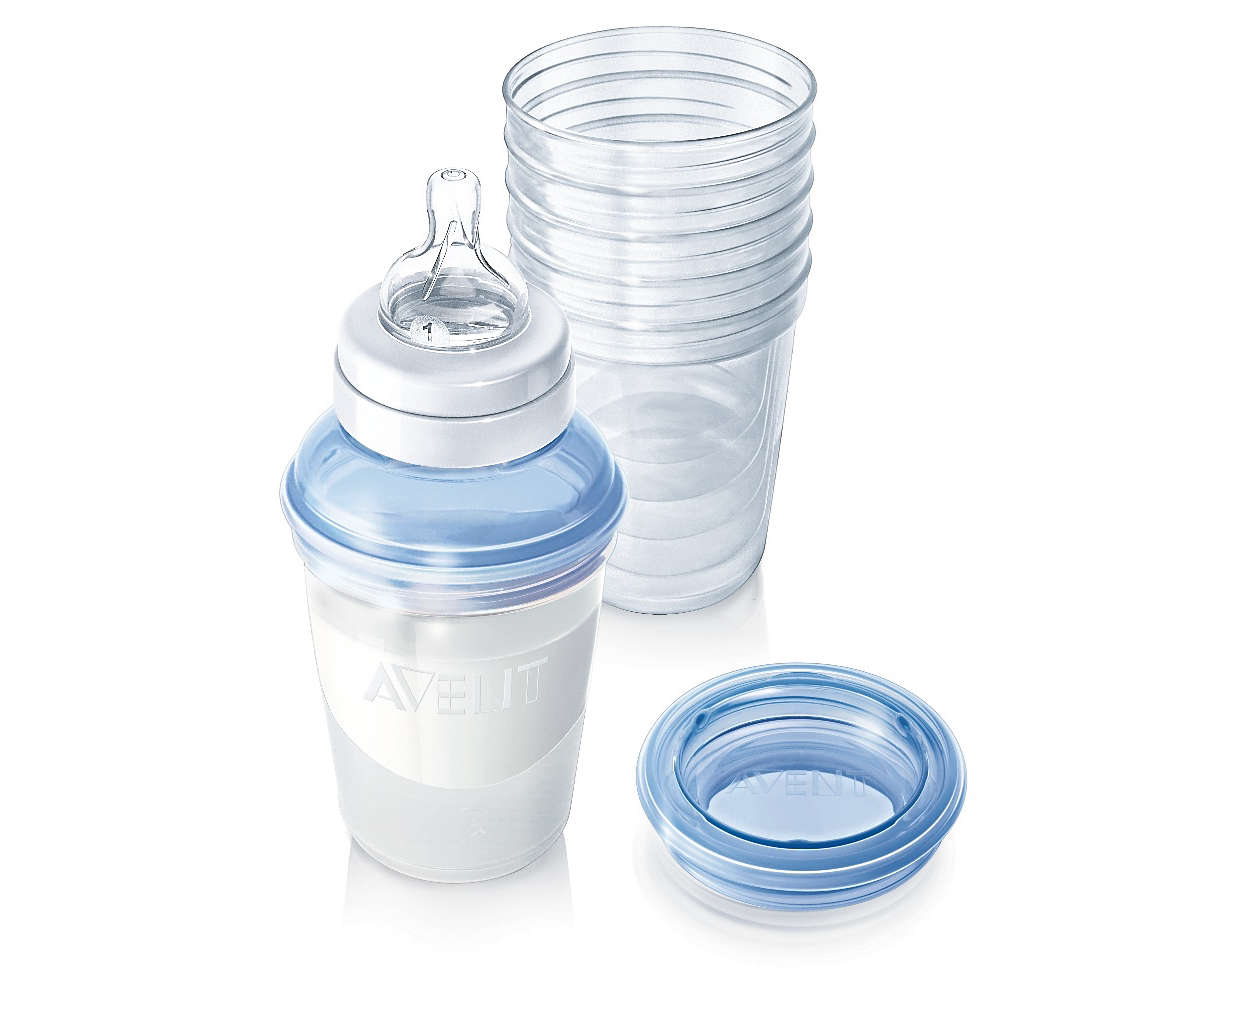 Philips Avent storage system for easy storage